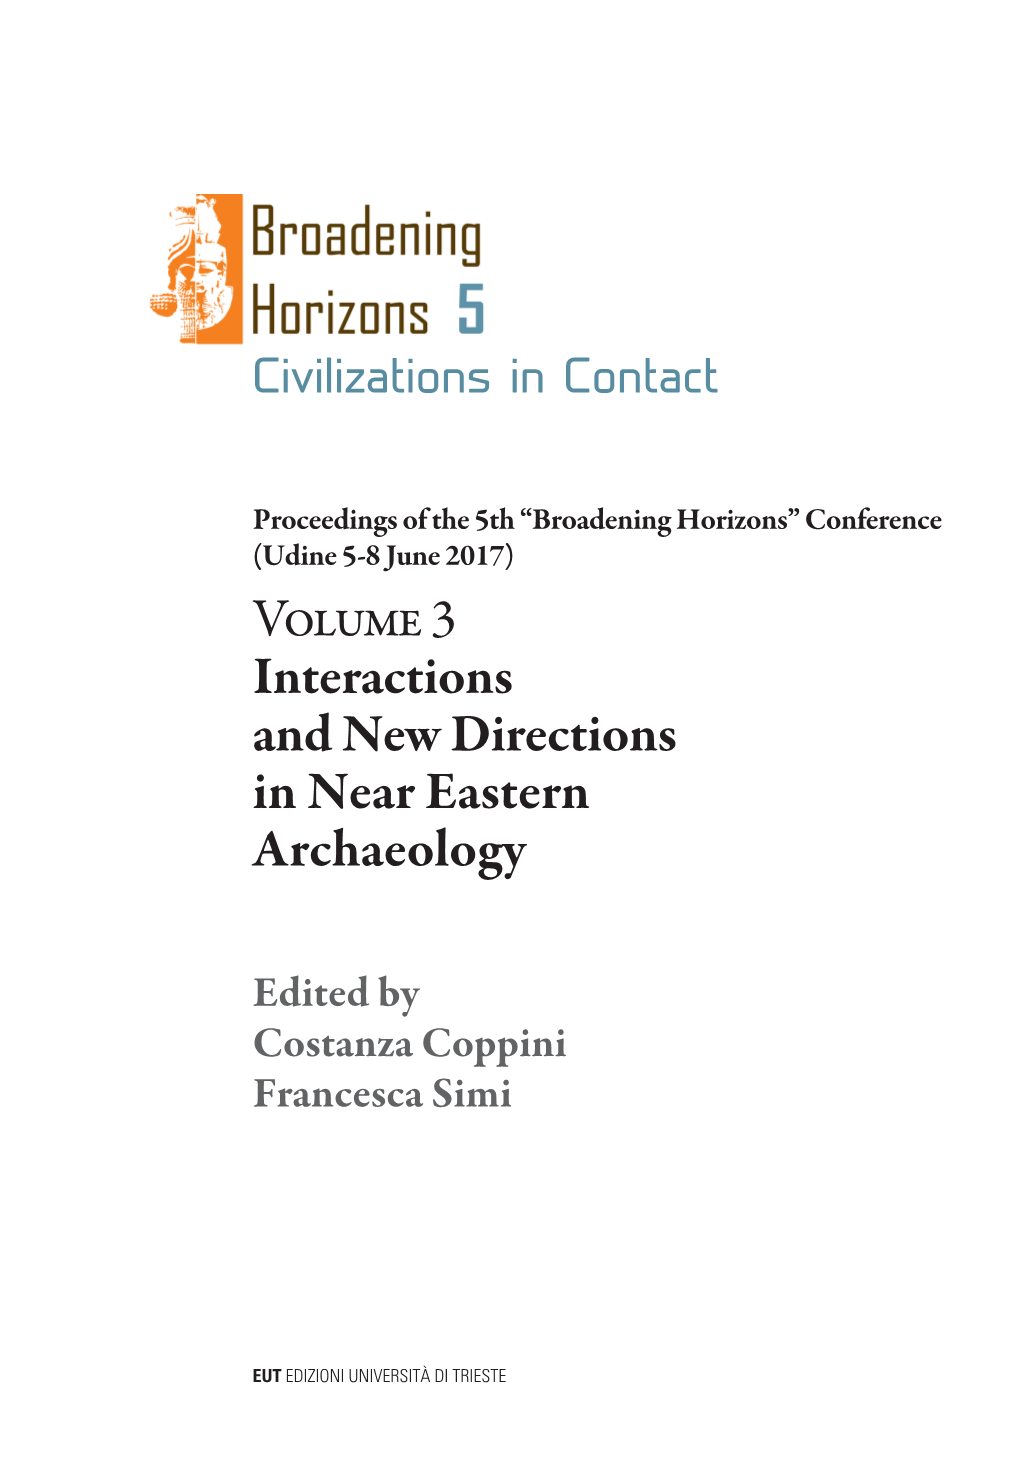 Volume 3 Interactions and New Directions in Near Eastern Archaeology